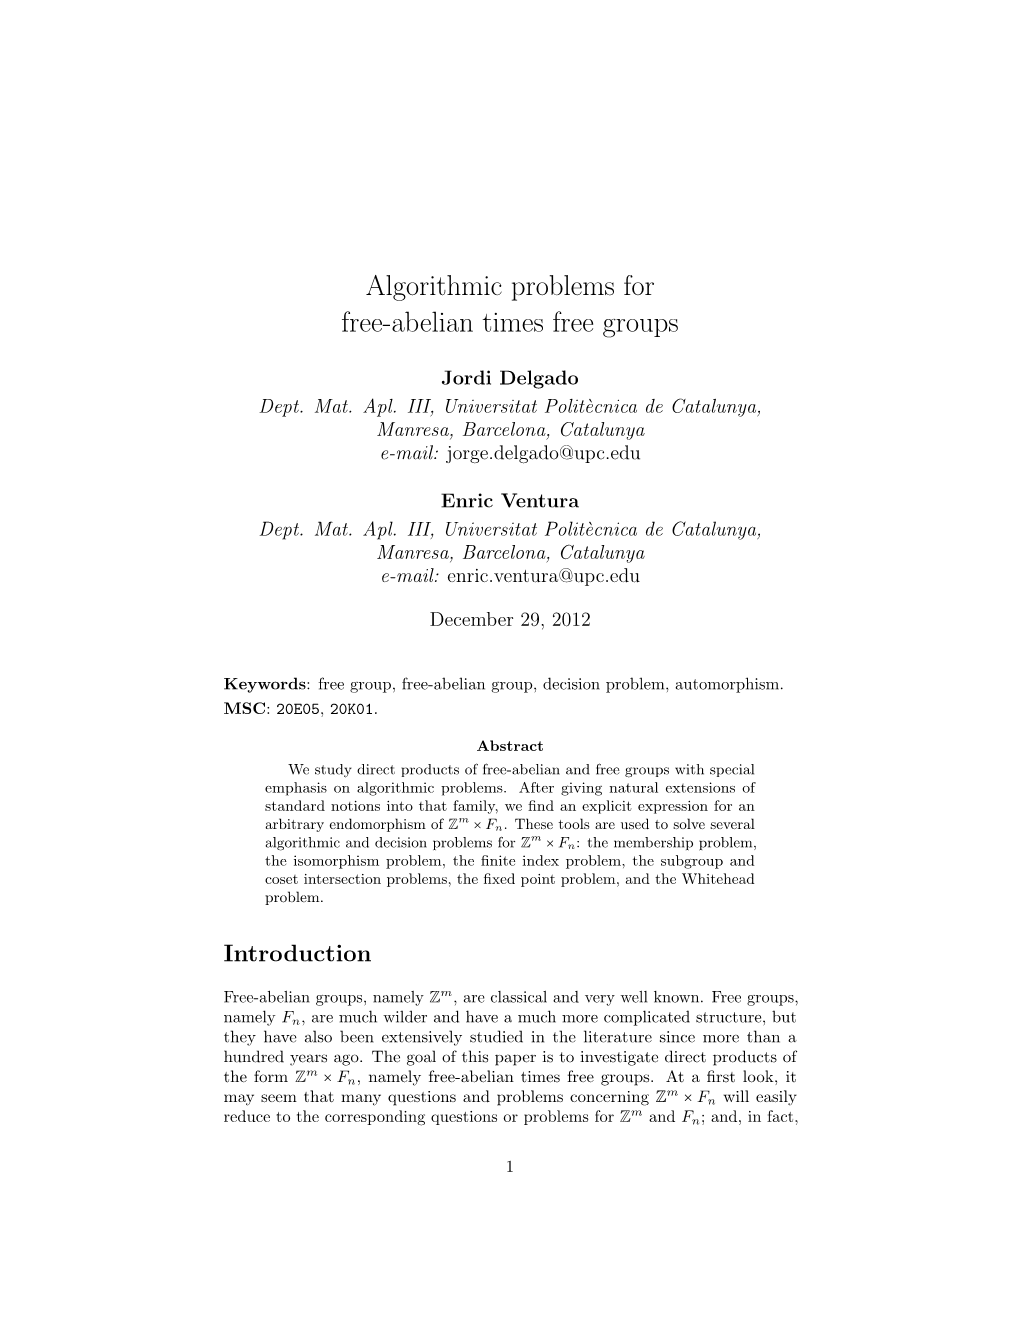 Algorithmic Problems for Free-Abelian Times Free Groups